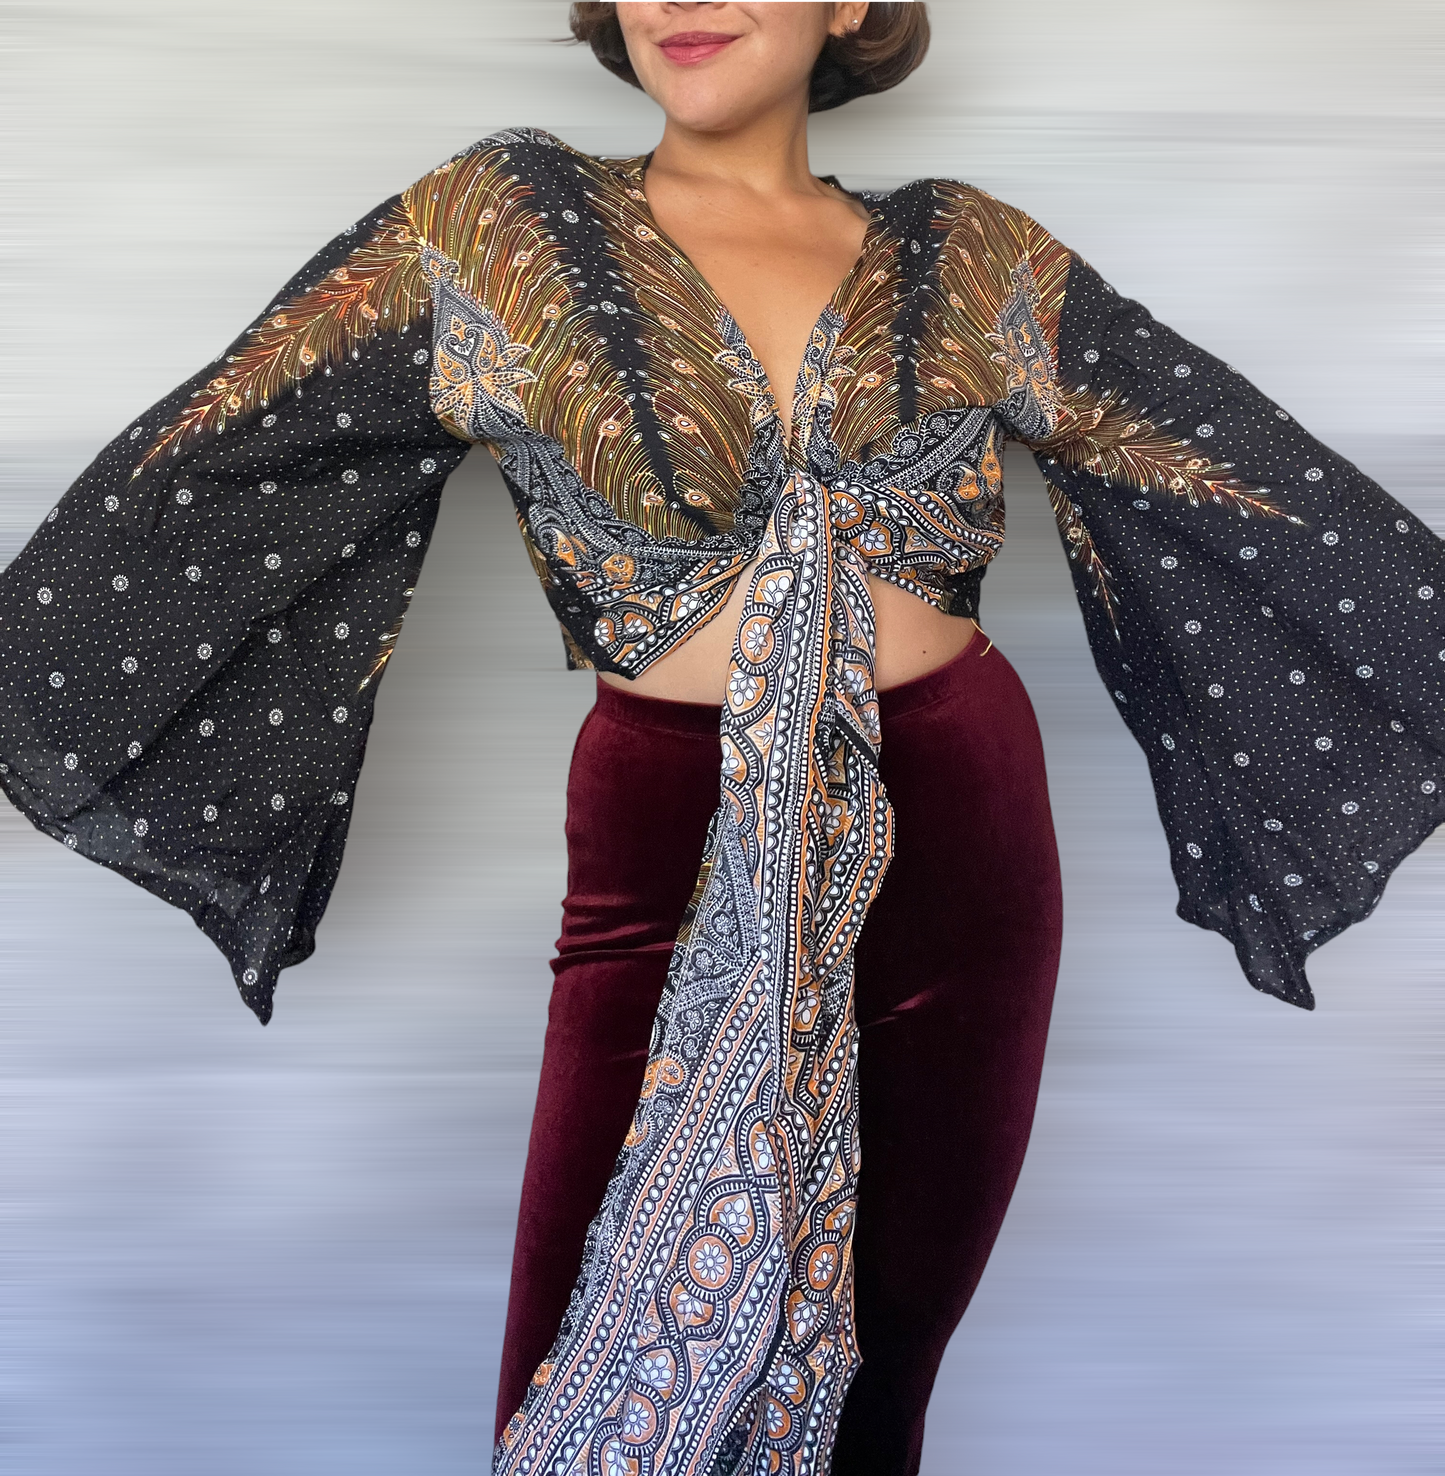 Black and Gold Peacock Wrap Tops With Flowy Sleeves